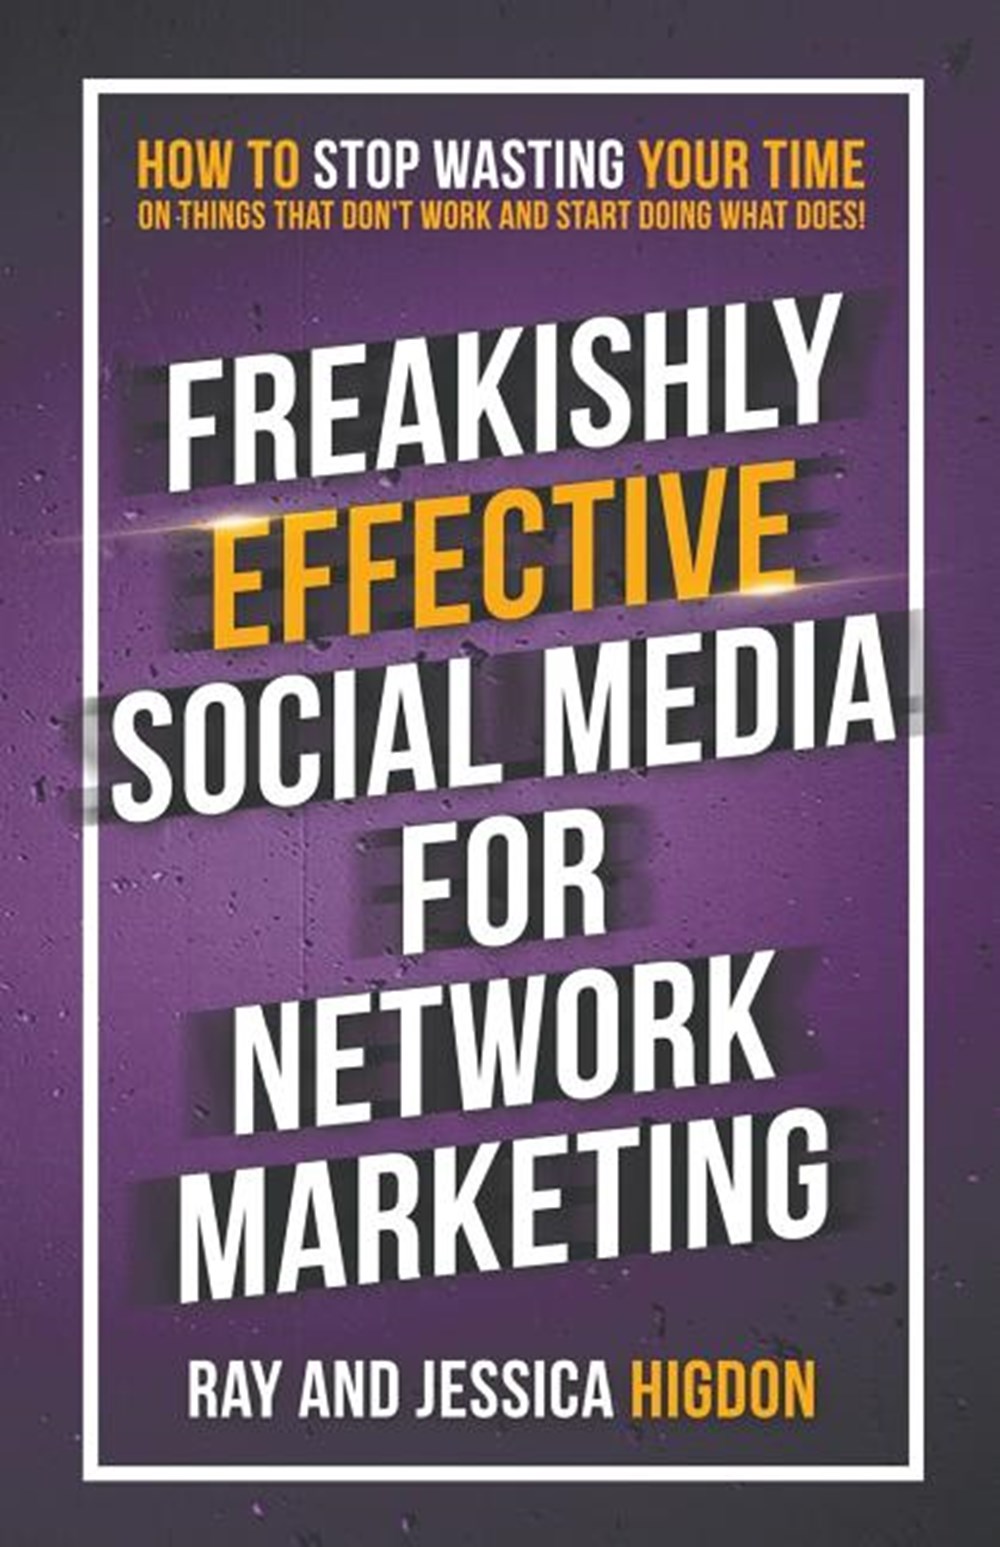 Freakishly Effective Social Media for Network Marketing How to Stop Wasting Your Time on Things That